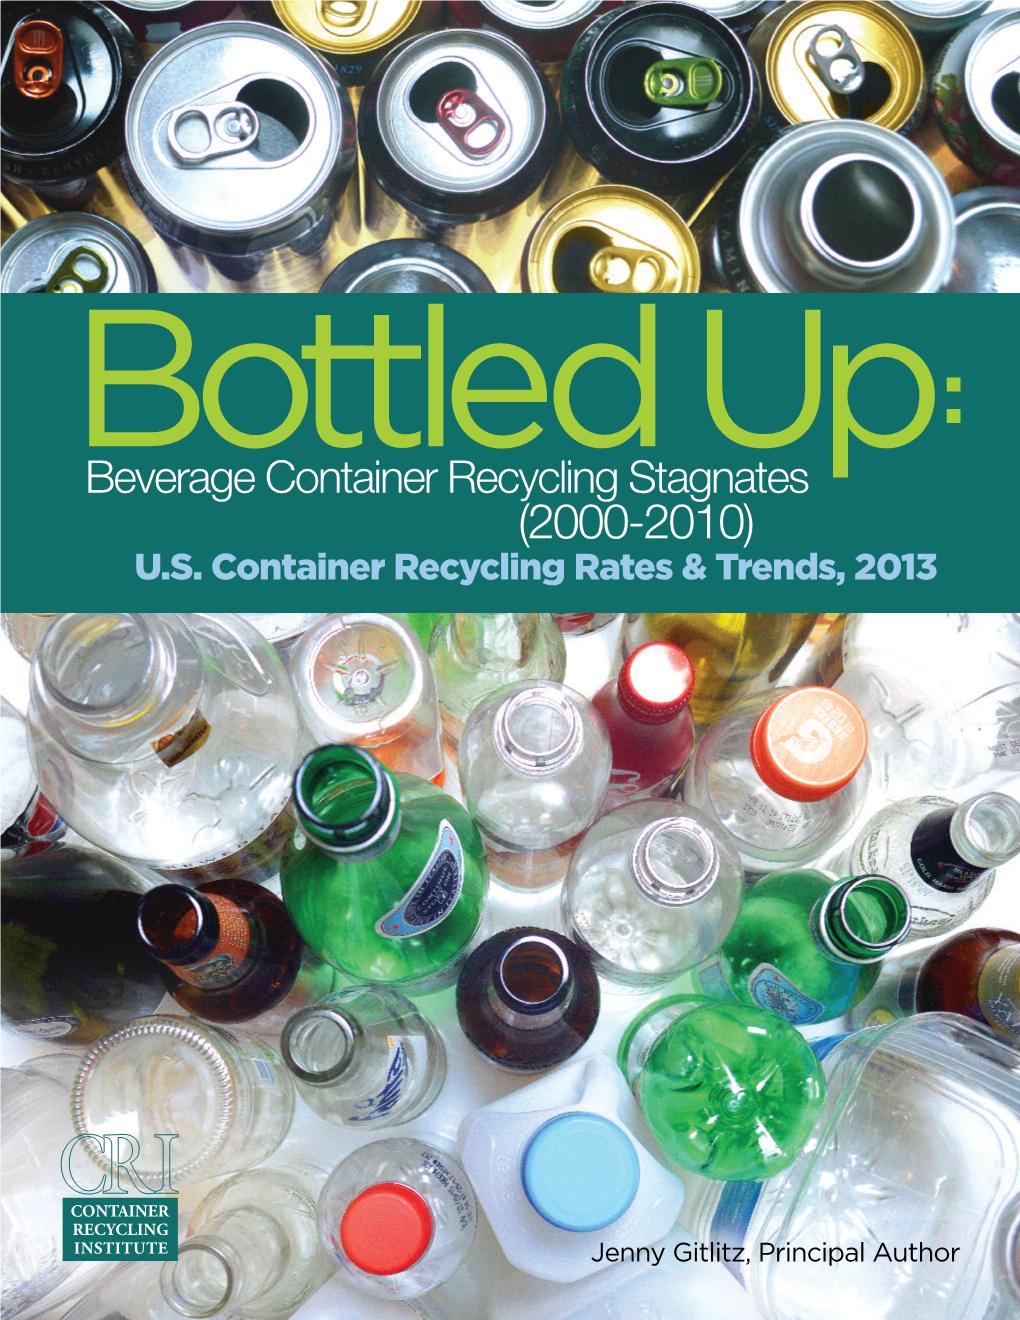 Beverage Container Recycling Stagnates (2000-2010) U.S